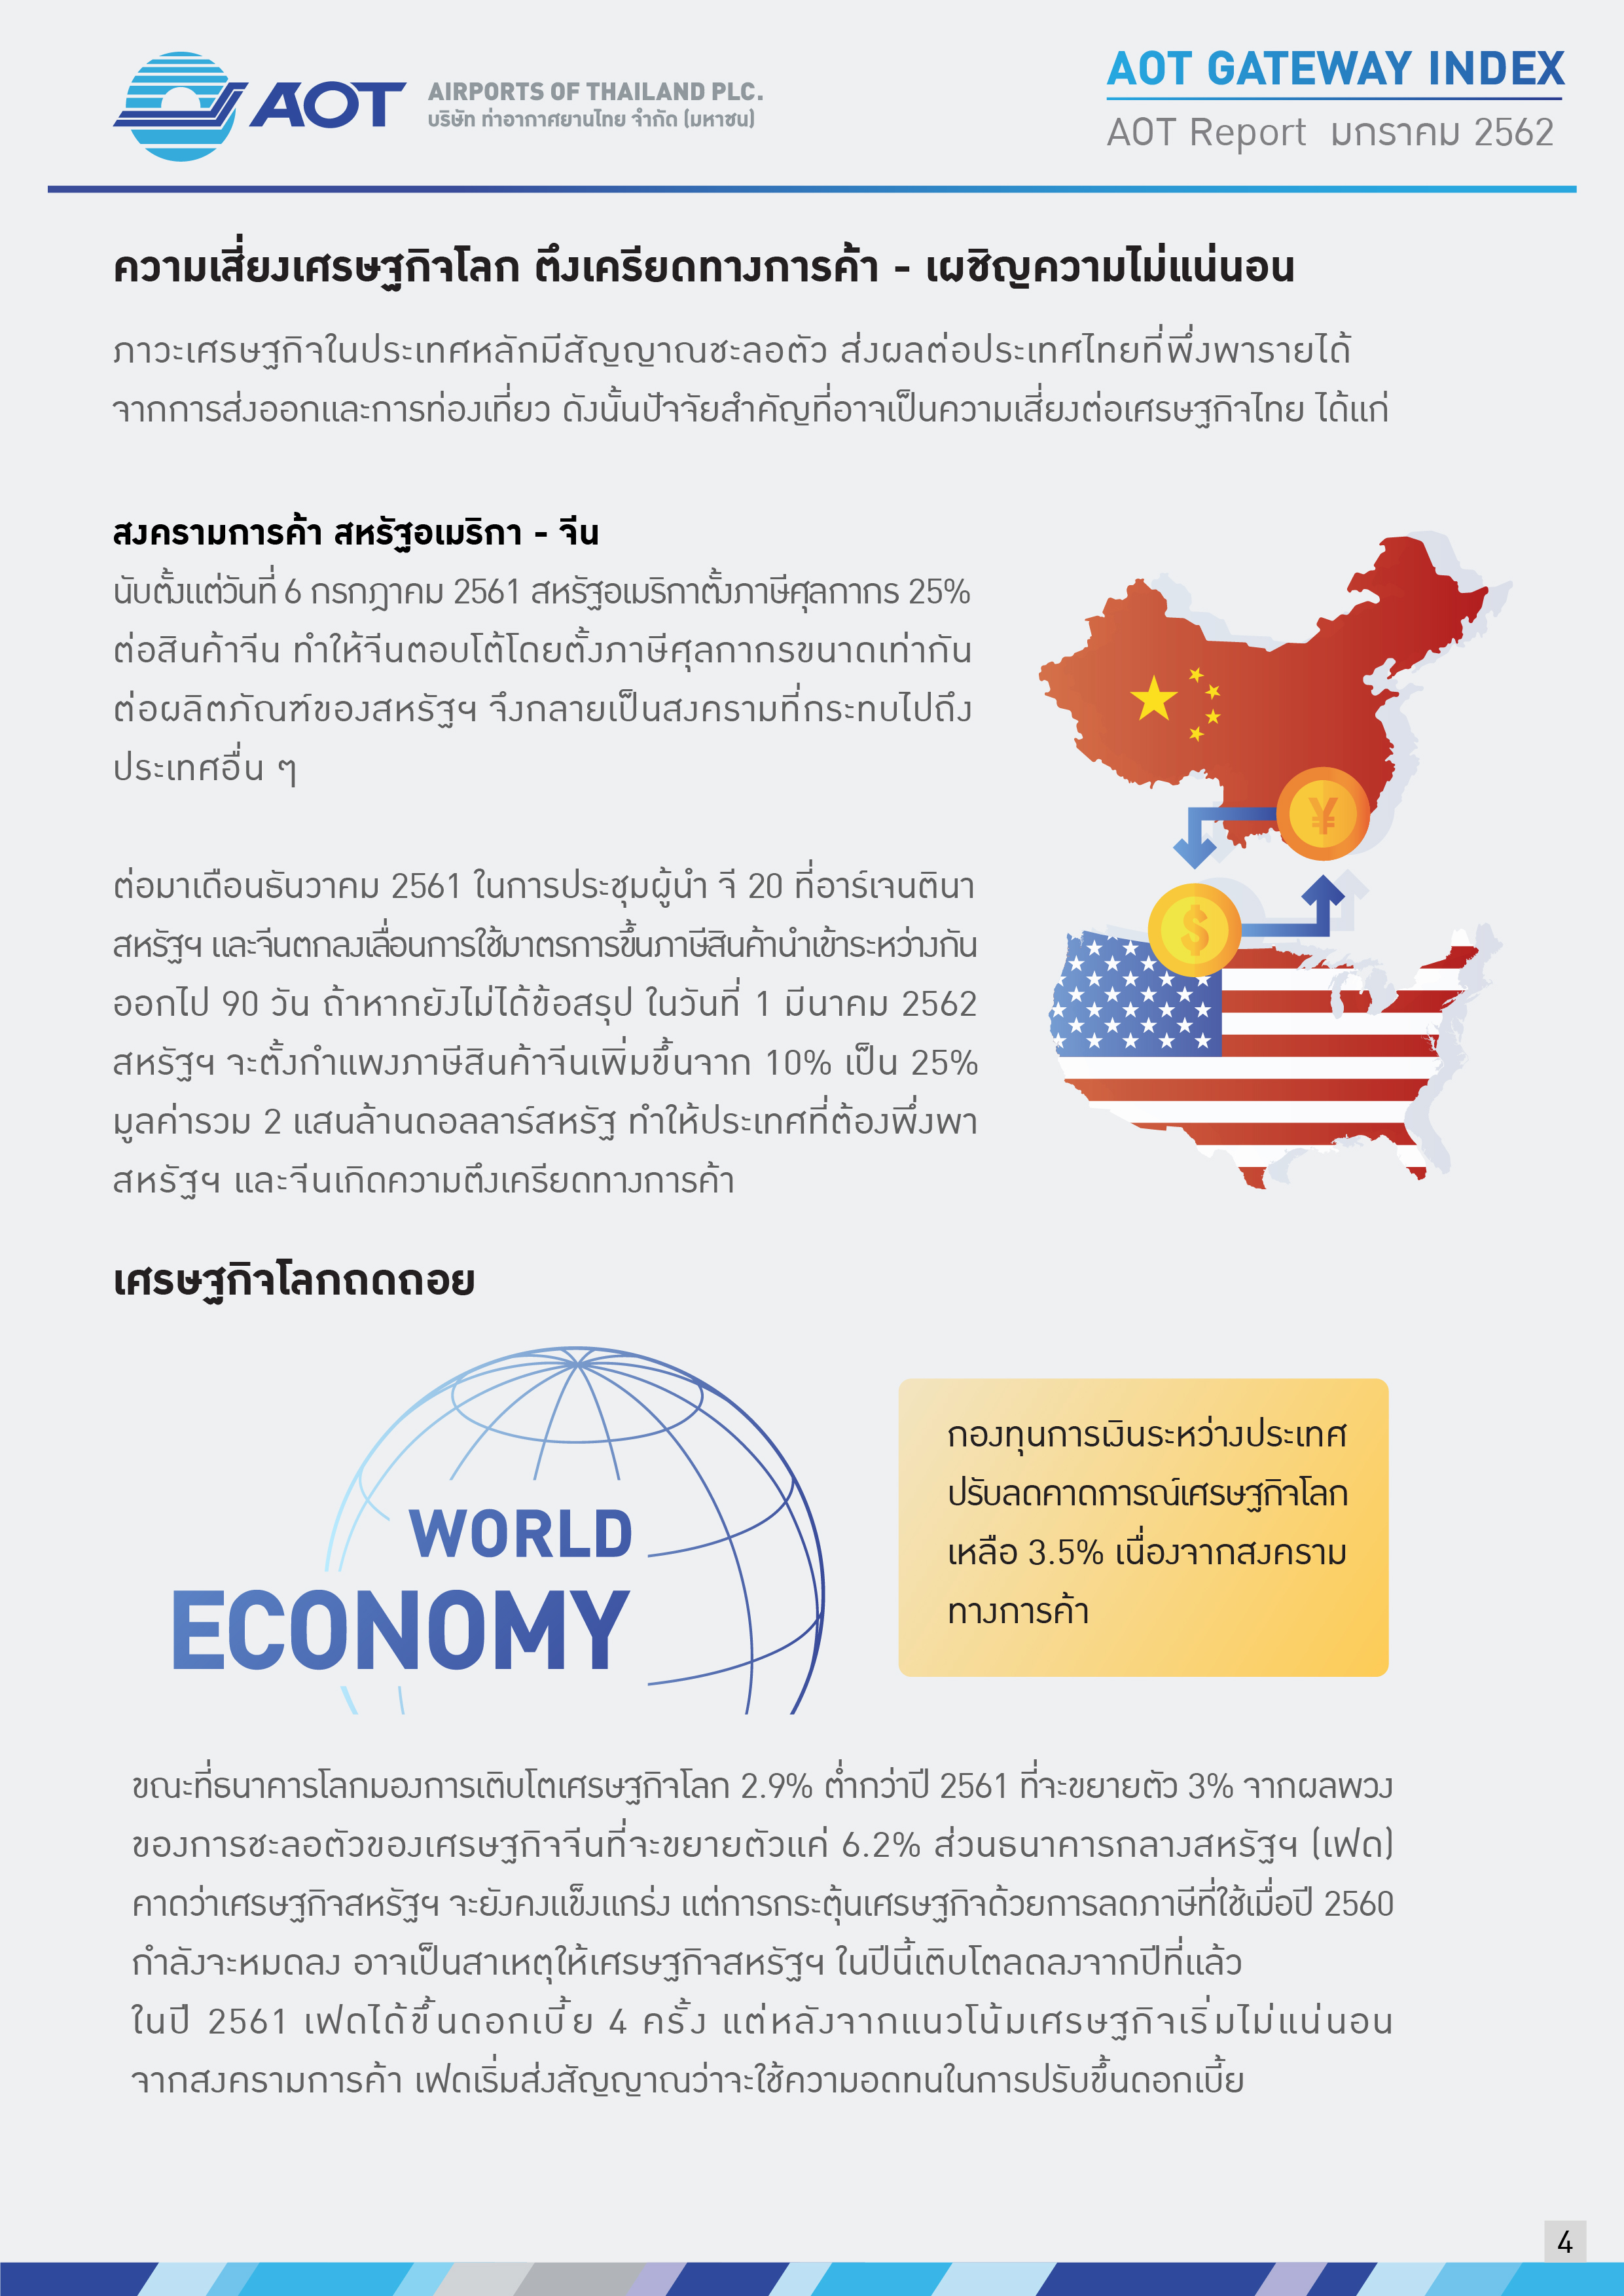 AOTcontent2019_Index_02_เศรษฐกิจโลก_V5_20190401_Page04